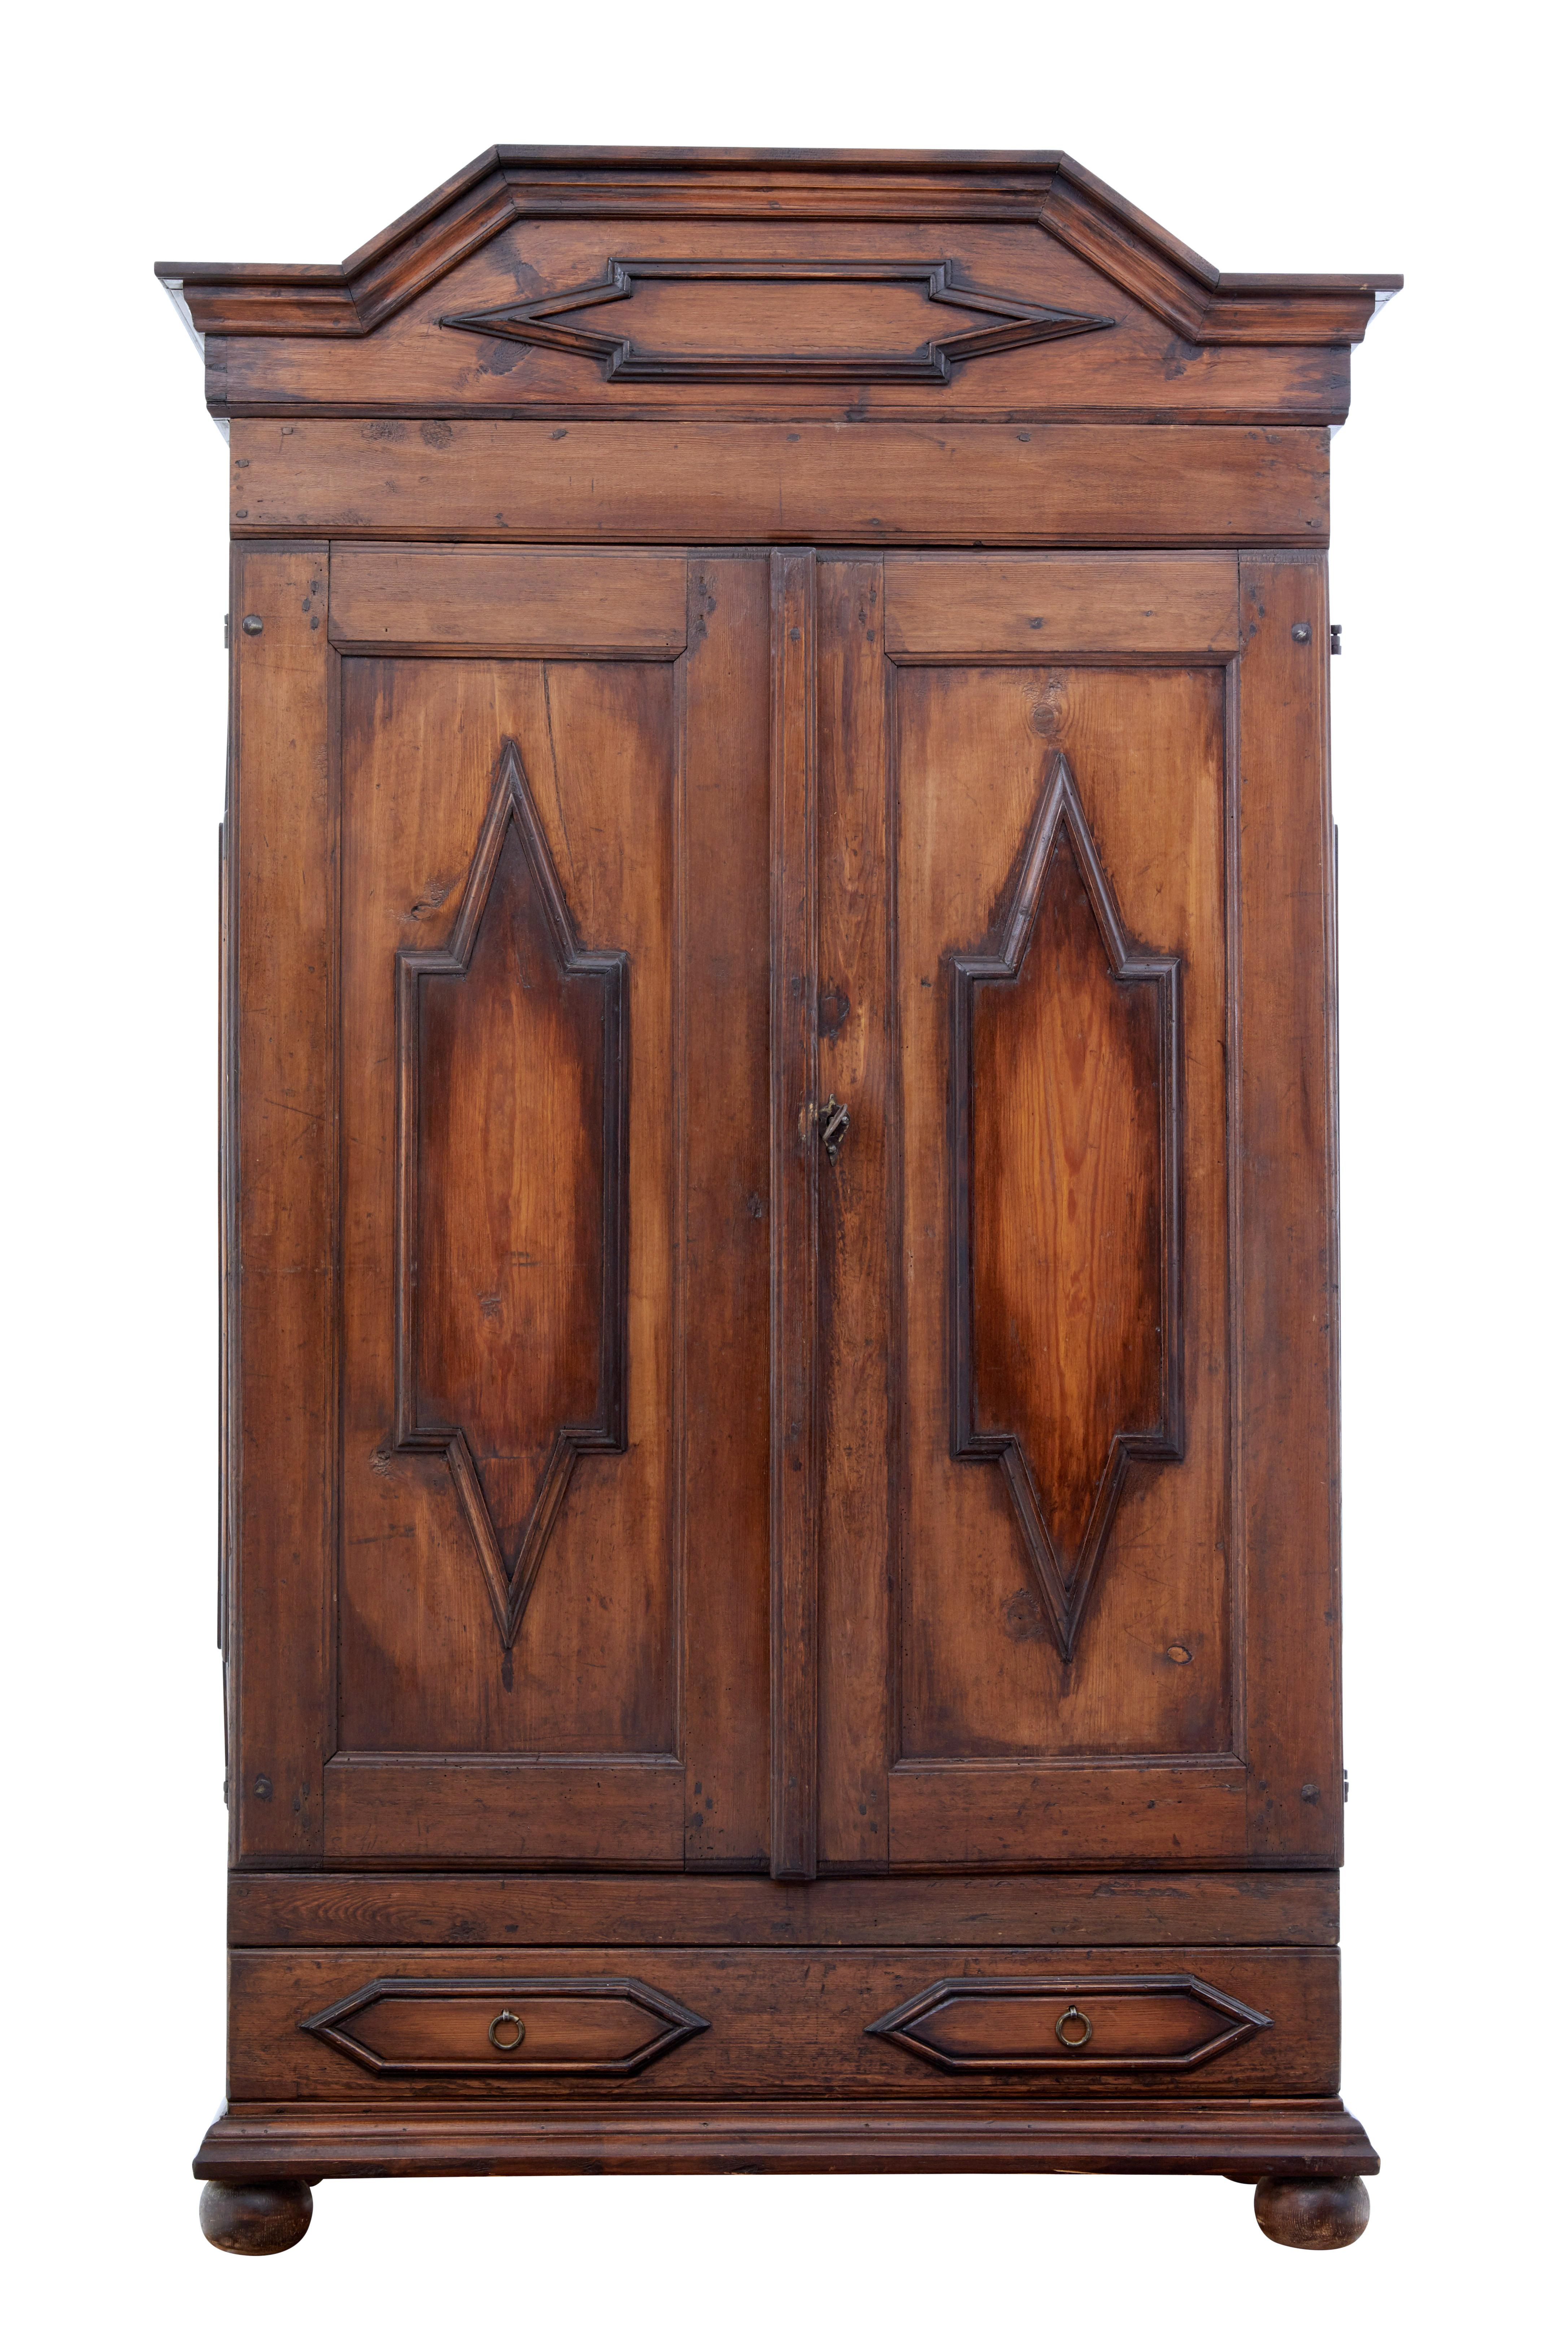 Striking Swedish Baroque pine cabinet circa, 1810.

Double door cupboard with applied angled motifs, these are repeated on the sides and on the cornice.

Cornice is removable, allowing this piece to be easier to install and ship. Dark stained